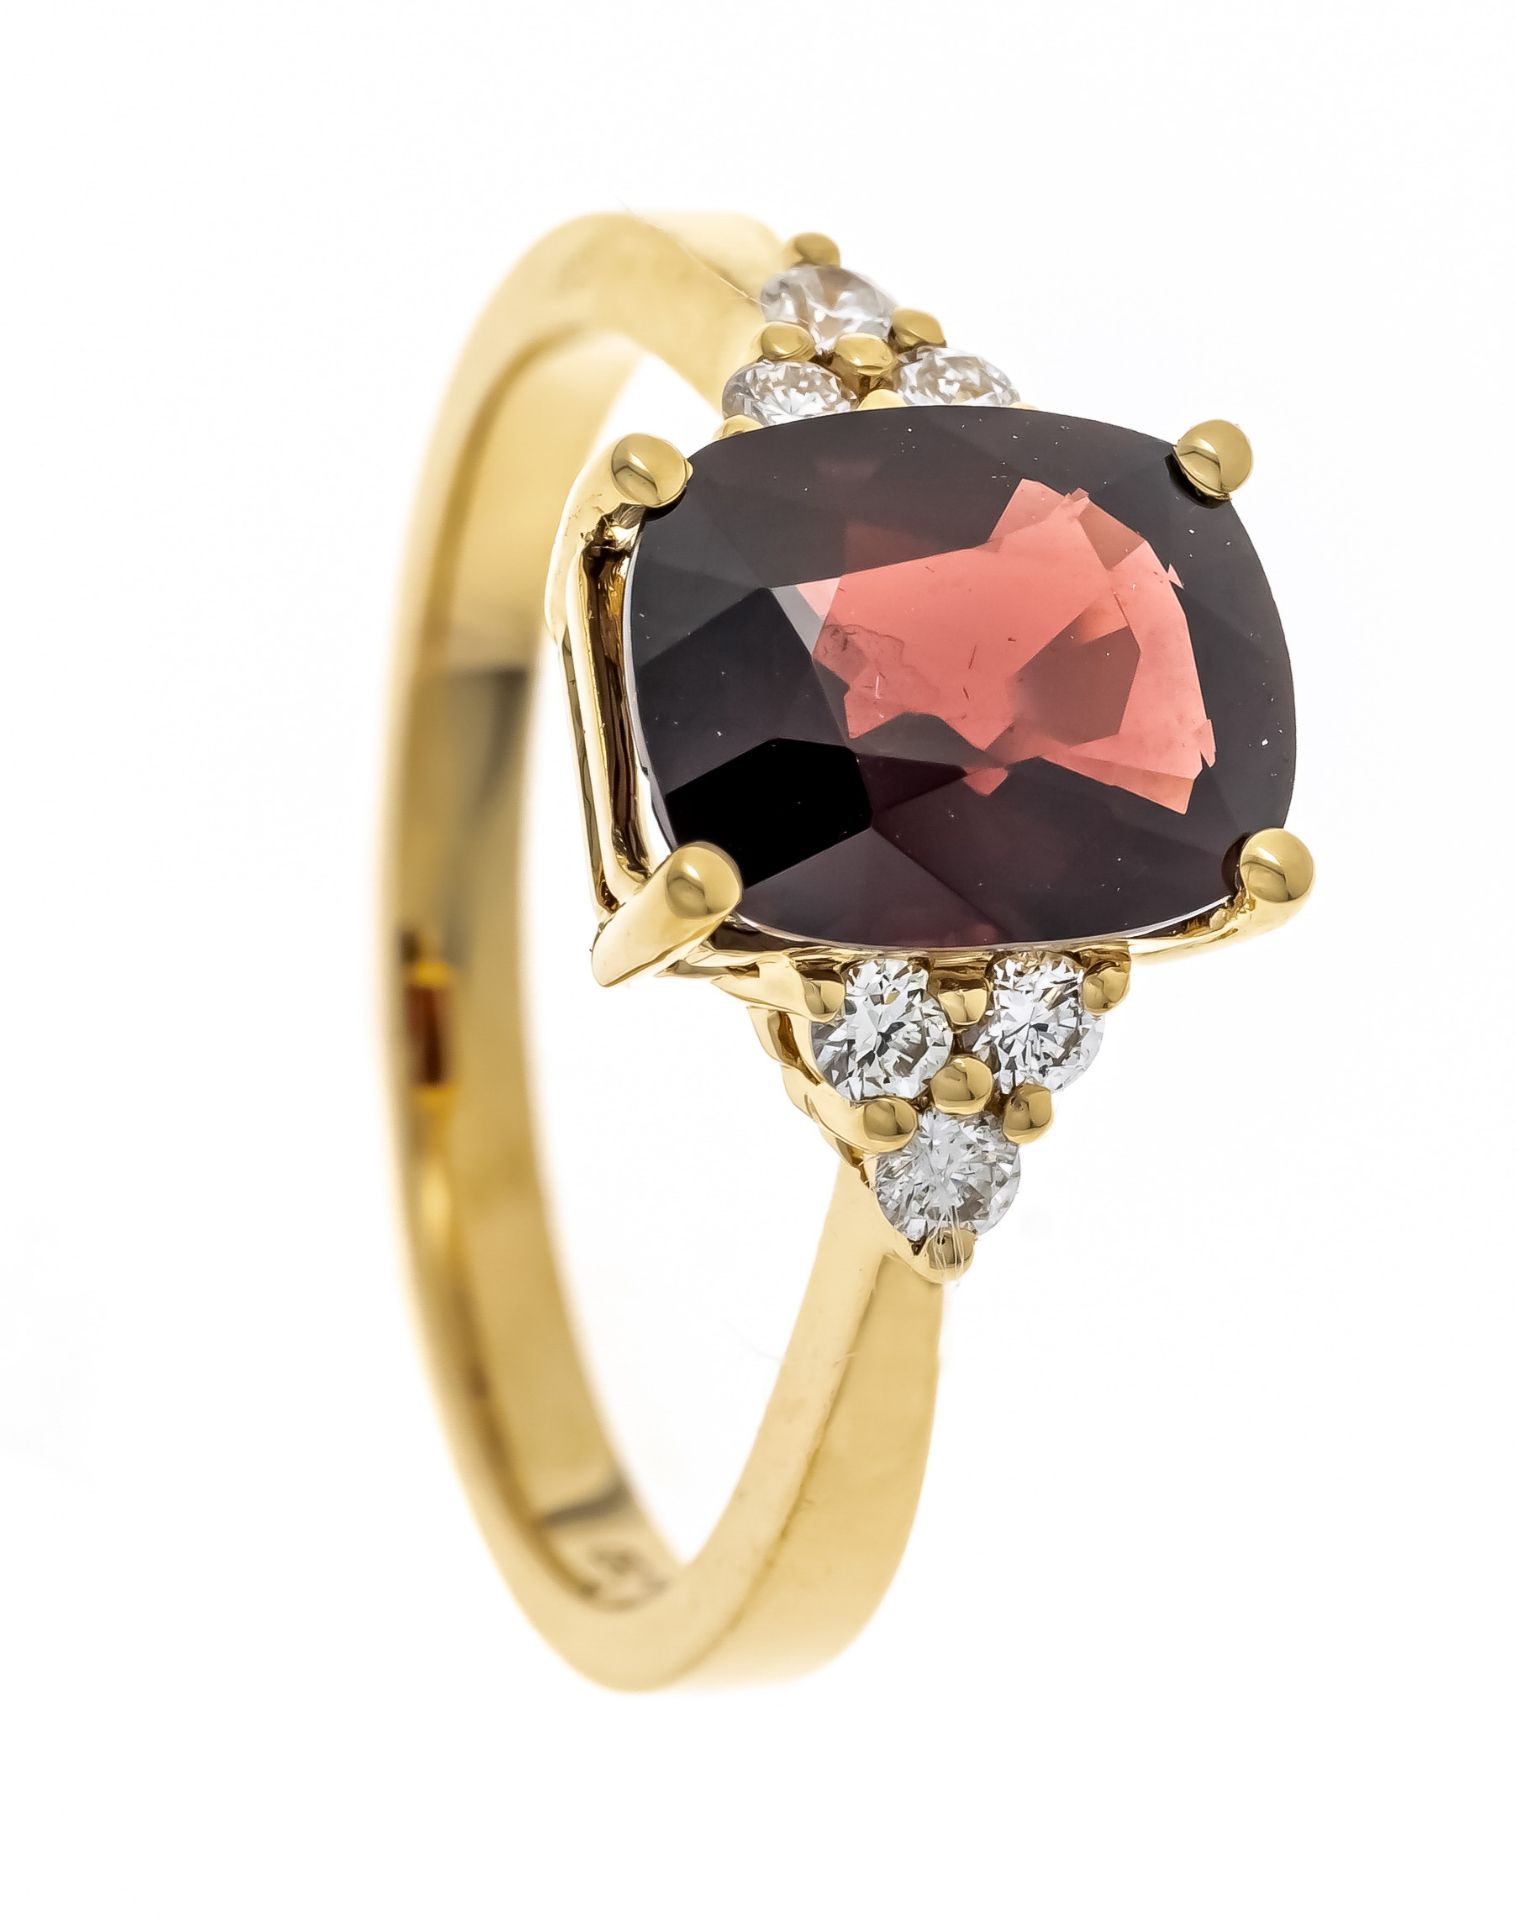 Red spinel ring GG 750/000 with one oval faceted spinel 9,1 x 7,2 mm, 3,37 ct, vivid dark red, eye-